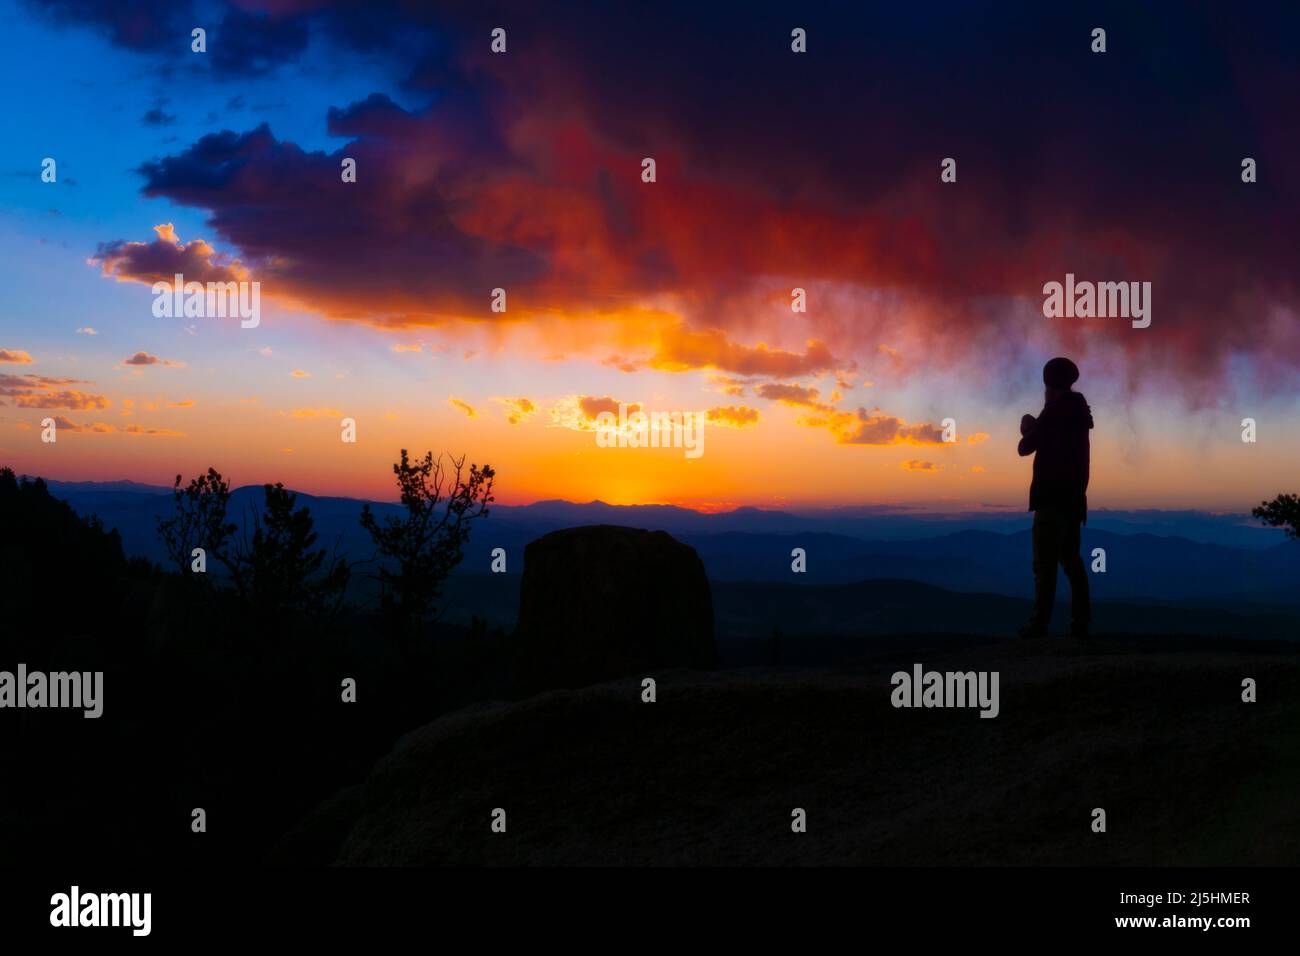 Silhouette of Person at Sunrise with colors Stock Photo